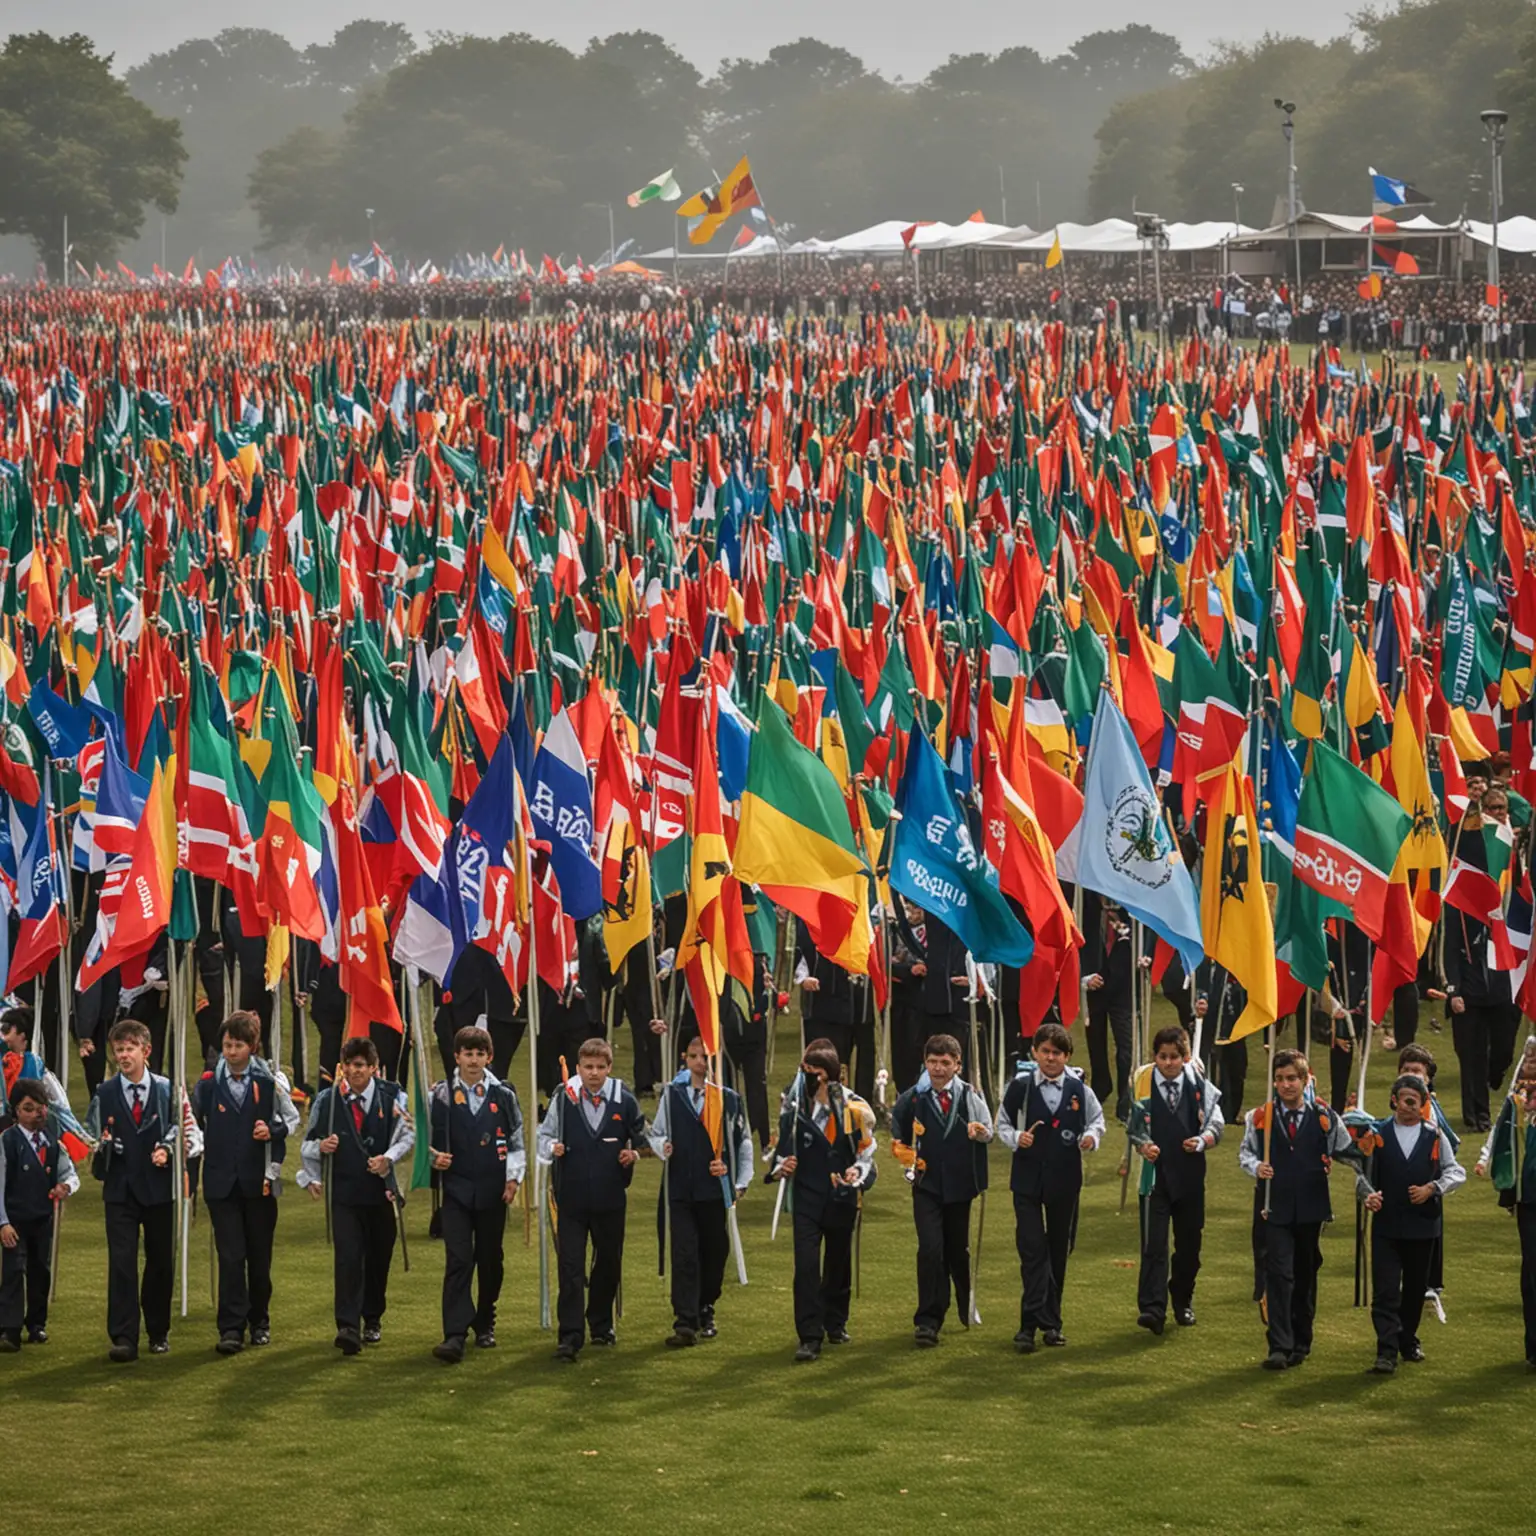 generate a scene where there is a parade going on in a school ground where students are holding flags of the school groupds in different colours. The main agenda of this image is to see big flags. The perspective of the image should be focued on only few students who are hodling flags